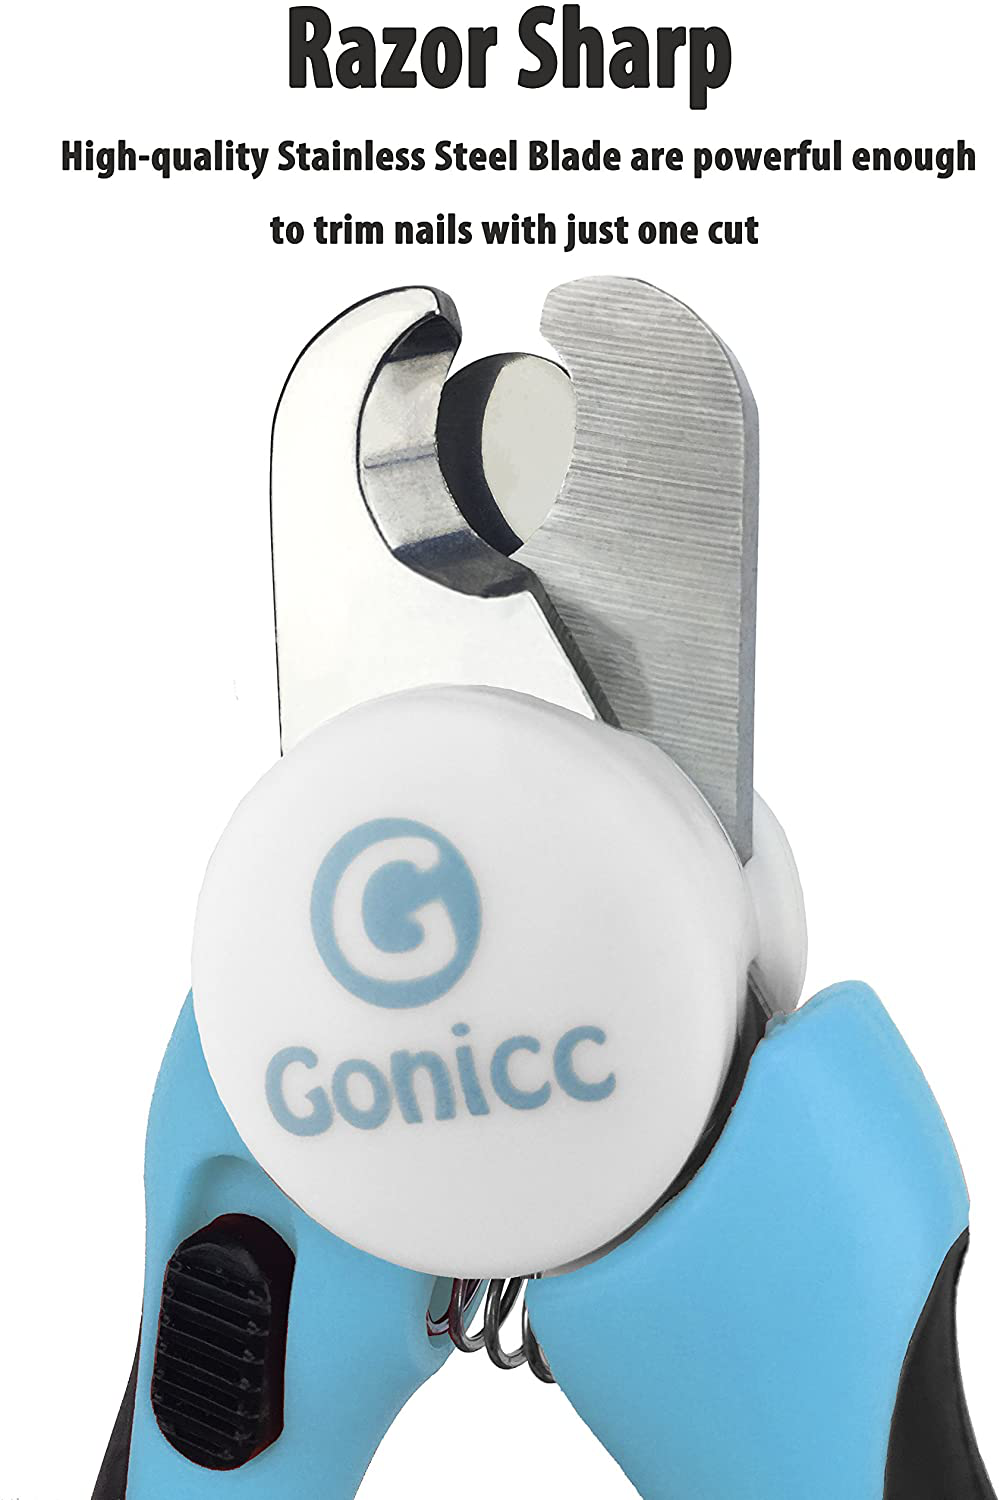 Gonicc Dog & Cat Pets Nail Clippers and Trimmers - with Safety Guard to Avoid over Cutting, Free Nail File, Razor Sharp Blade - Professional Grooming Tool for Pets Animals & Pet Supplies > Pet Supplies > Bird Supplies > Bird Treats gonicc   